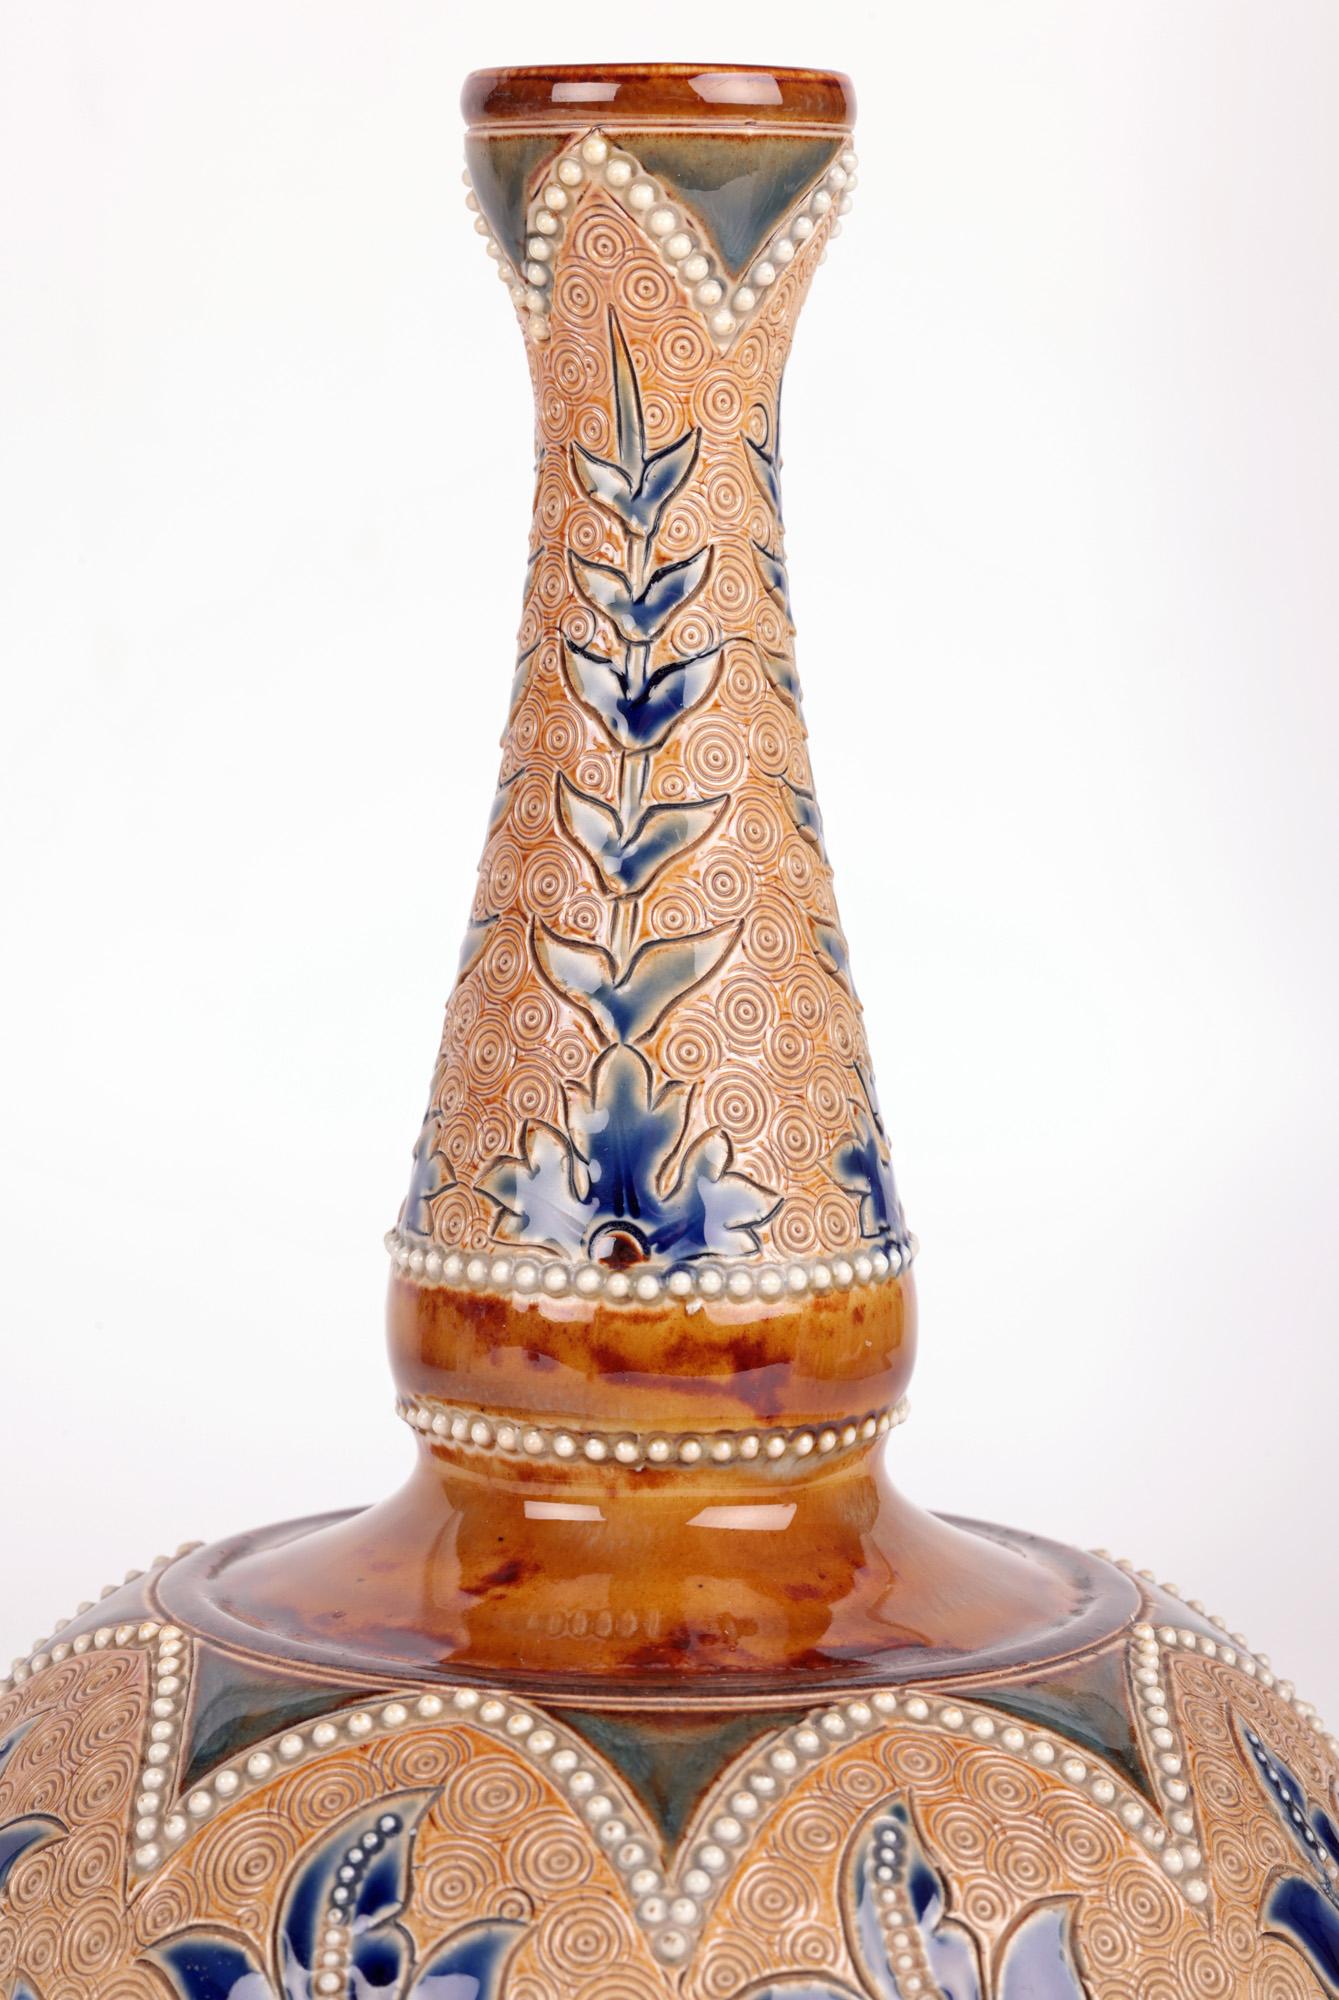 A very stylish Aesthetic Movement Doulton Lambeth floral design Vase made for the Art Union of London by renowned artist Emily E Stormer and dating from around 1885. The stoneware vase stands on a narrow unglazed round foot with a round bulbous body